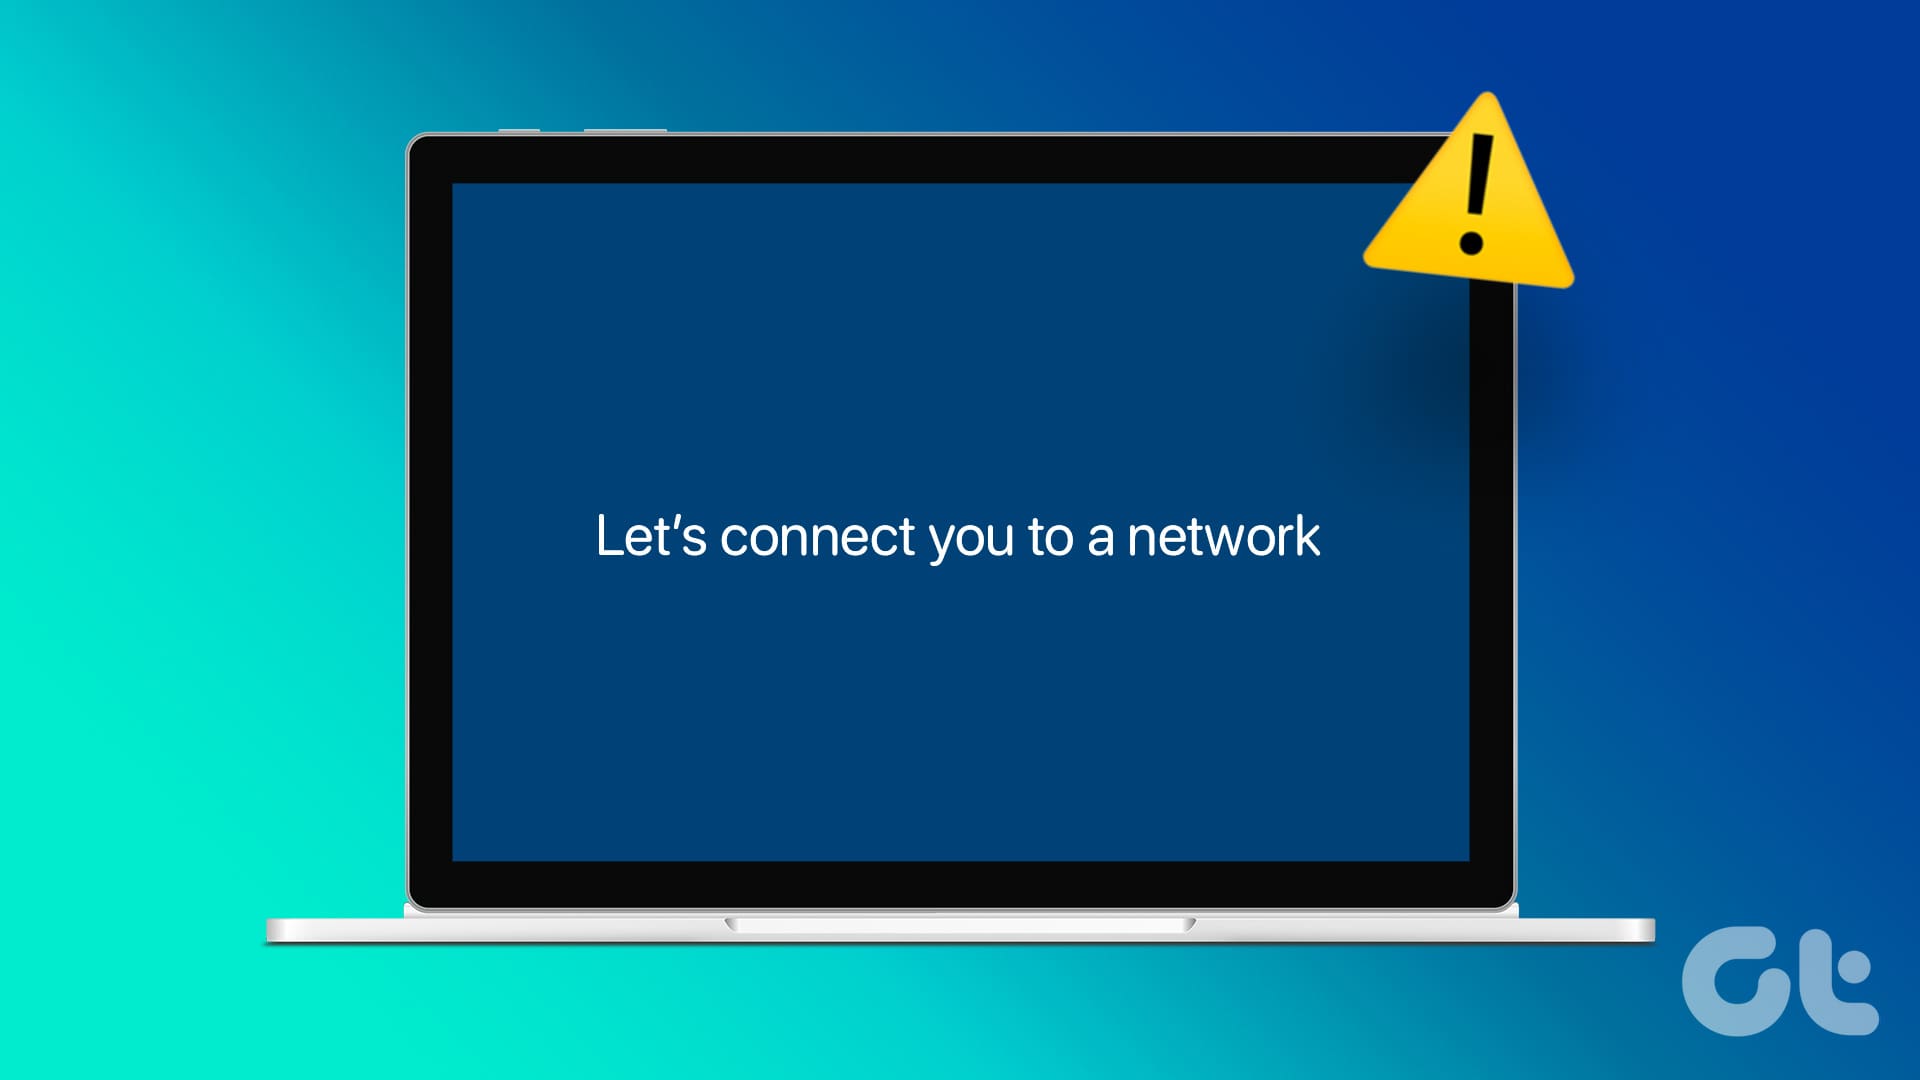 Windows Stuck on Lets Connect You to a Network